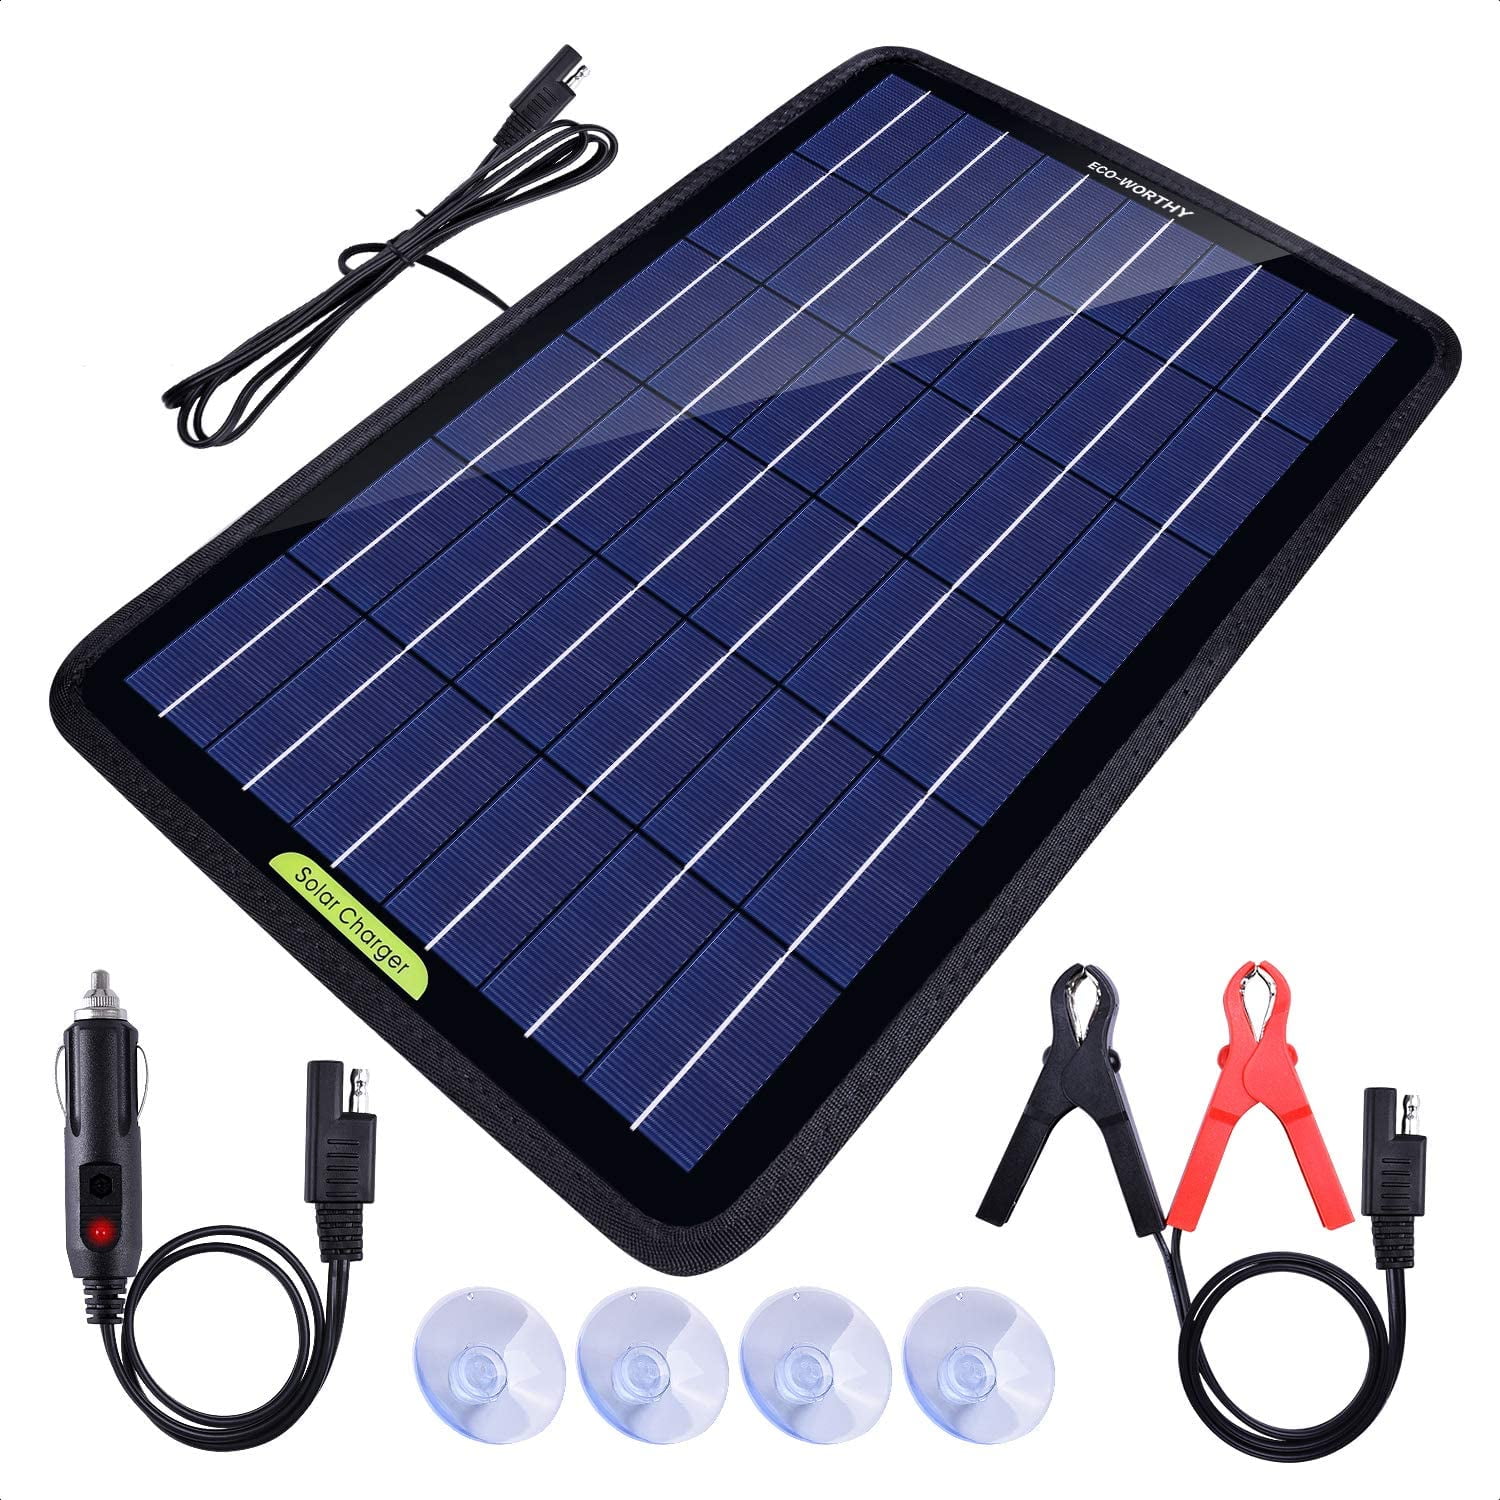 Marine Portable 8W Solar Panel Trickle Charging Kit for Automotive RV Trailer Motorcycle Snowmobile Powersports SUNER POWER 12V Solar Car Battery Charger & Maintainer Boat etc.